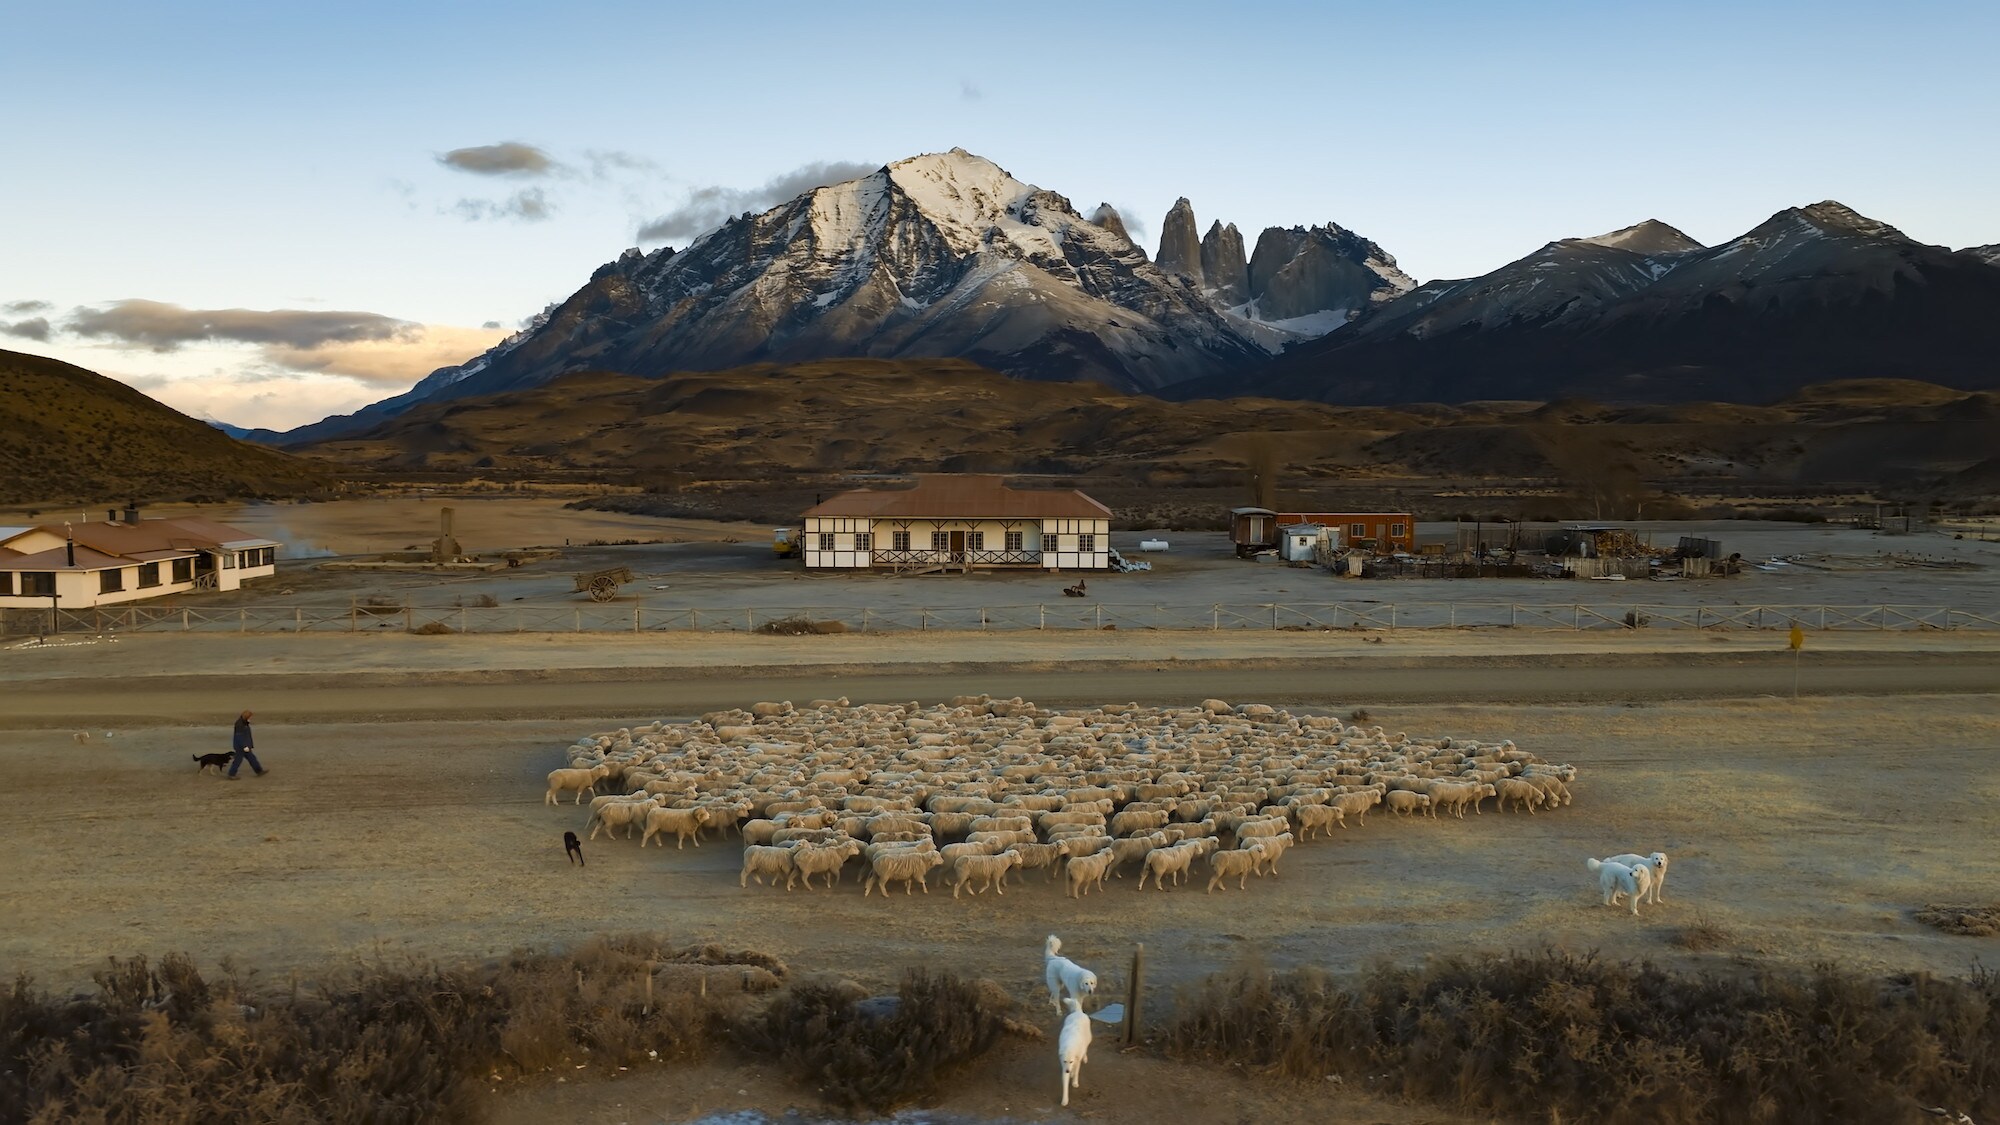 Sheep dogs herding sheep. (National Geographic for Disney+/Bertie Gregory)